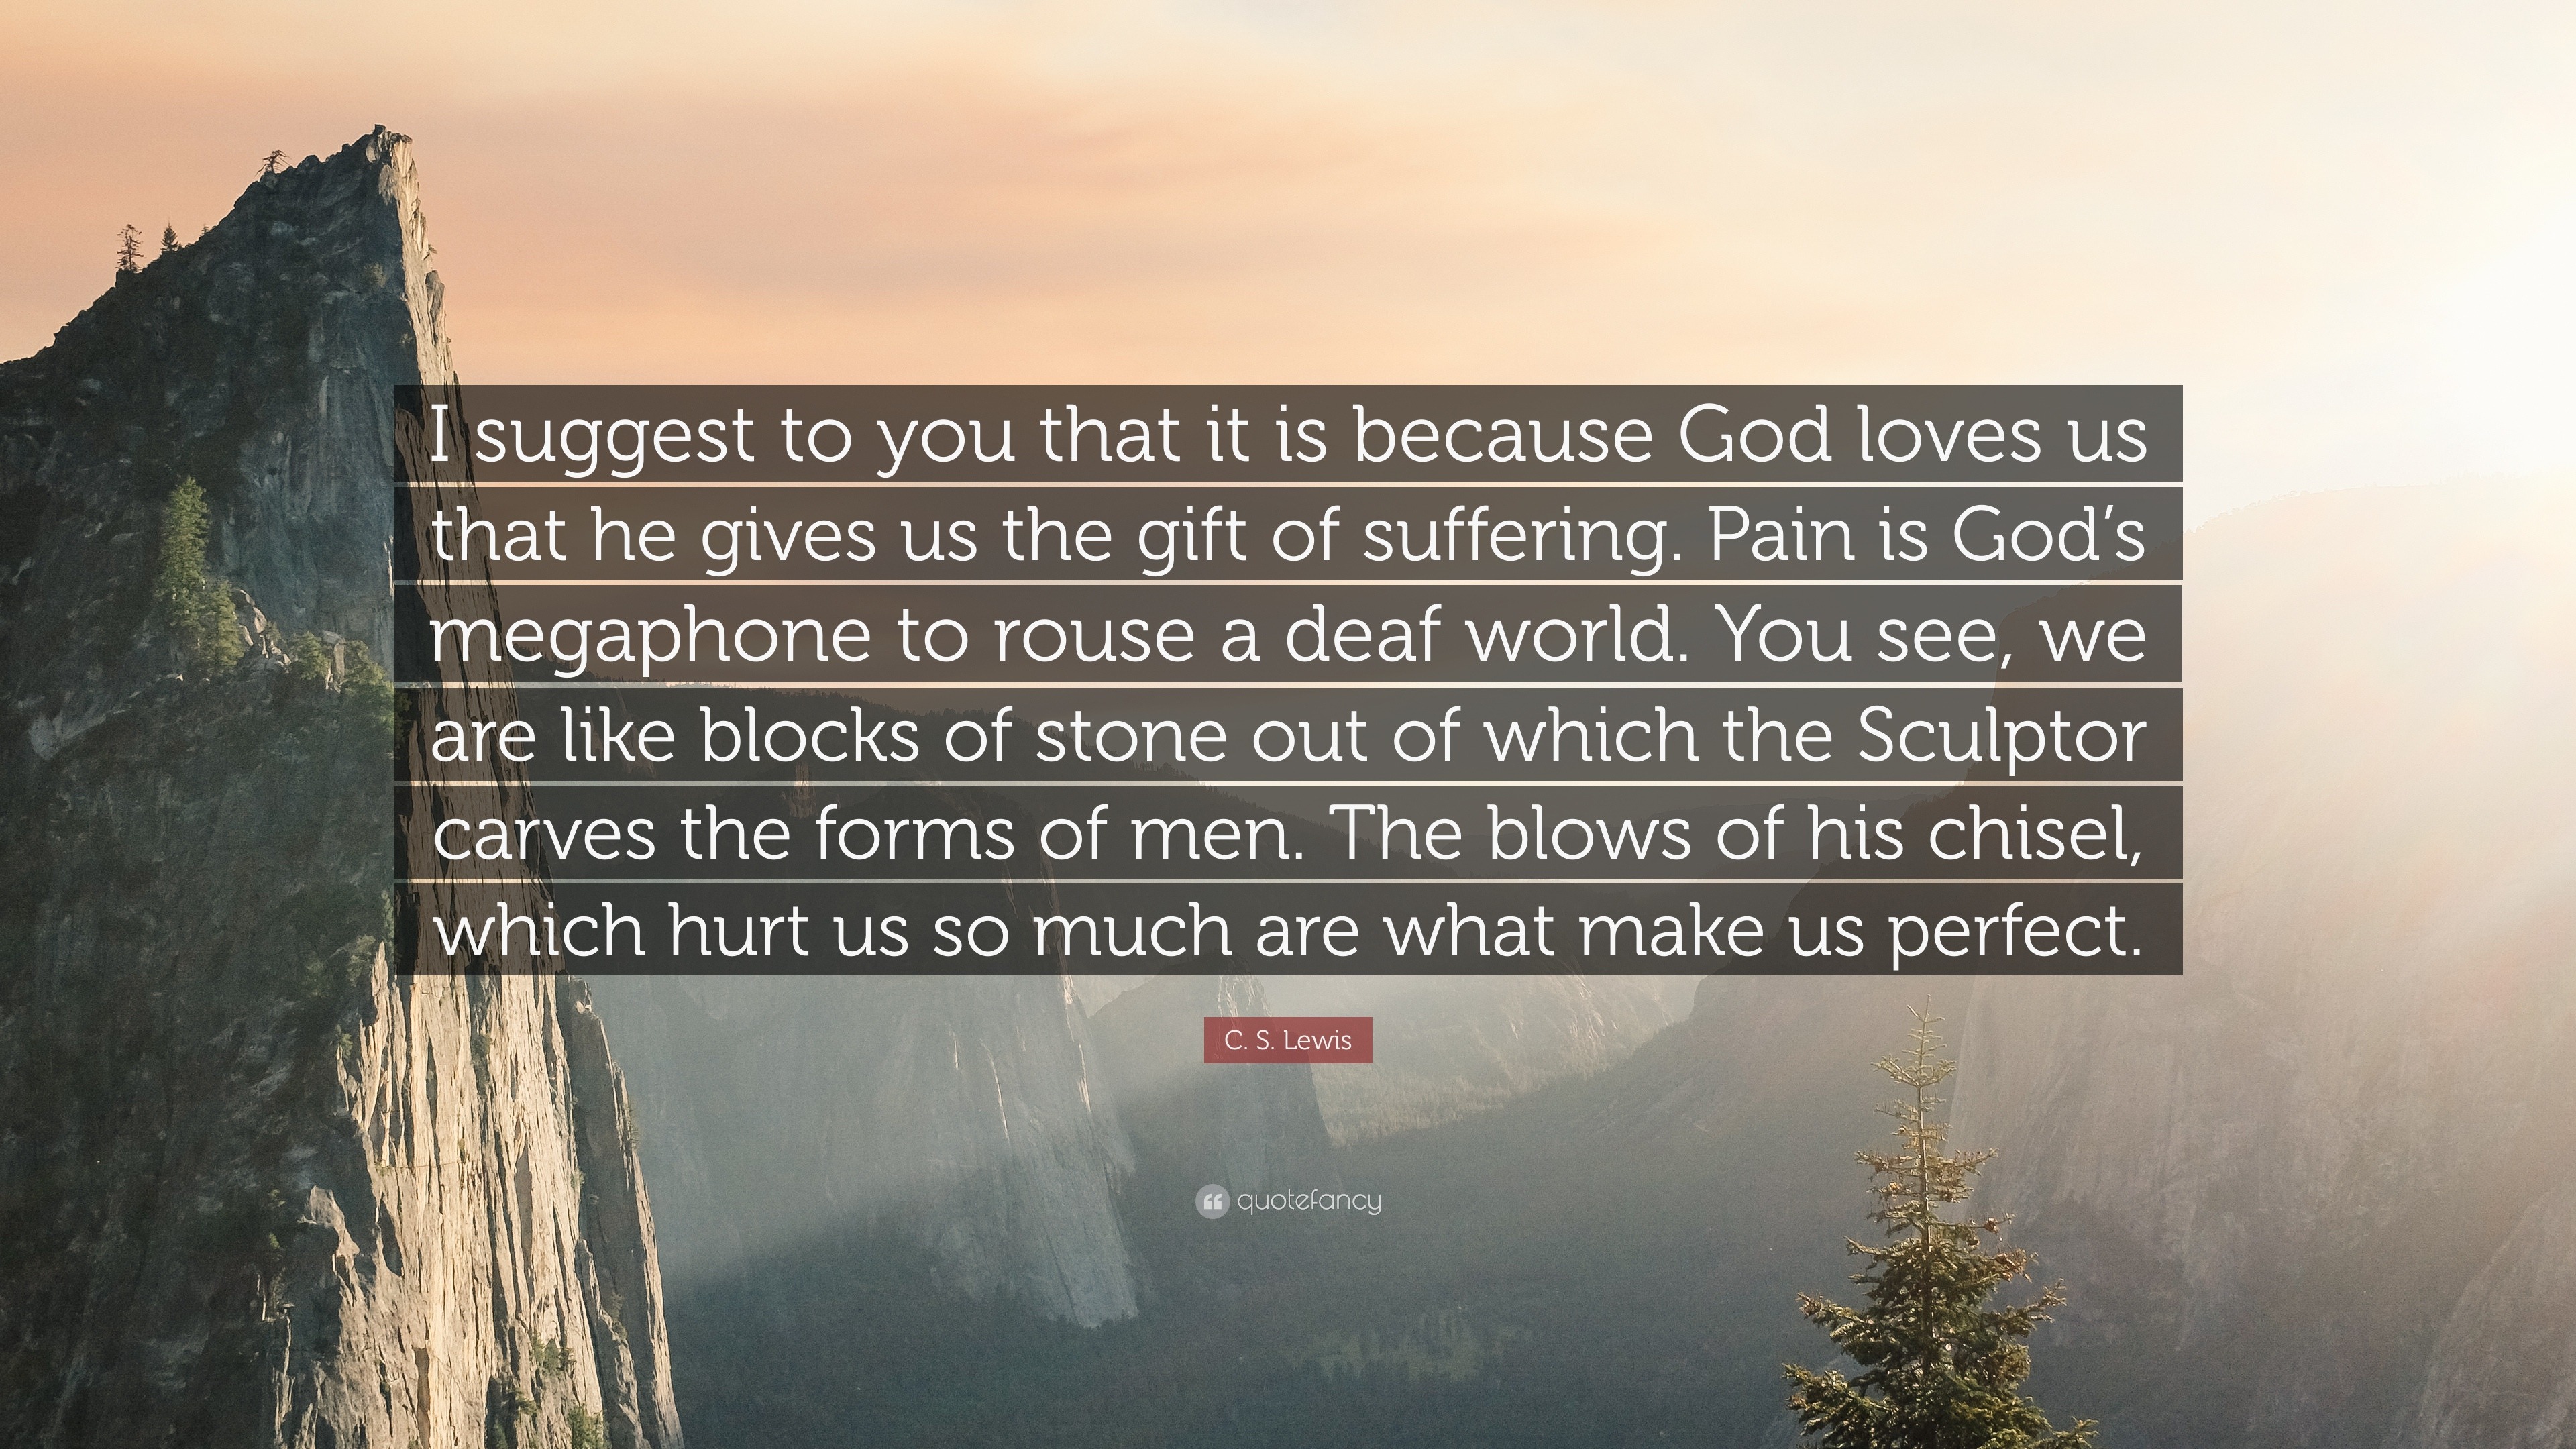 C S Lewis Quote “I suggest to you that it is because God loves us